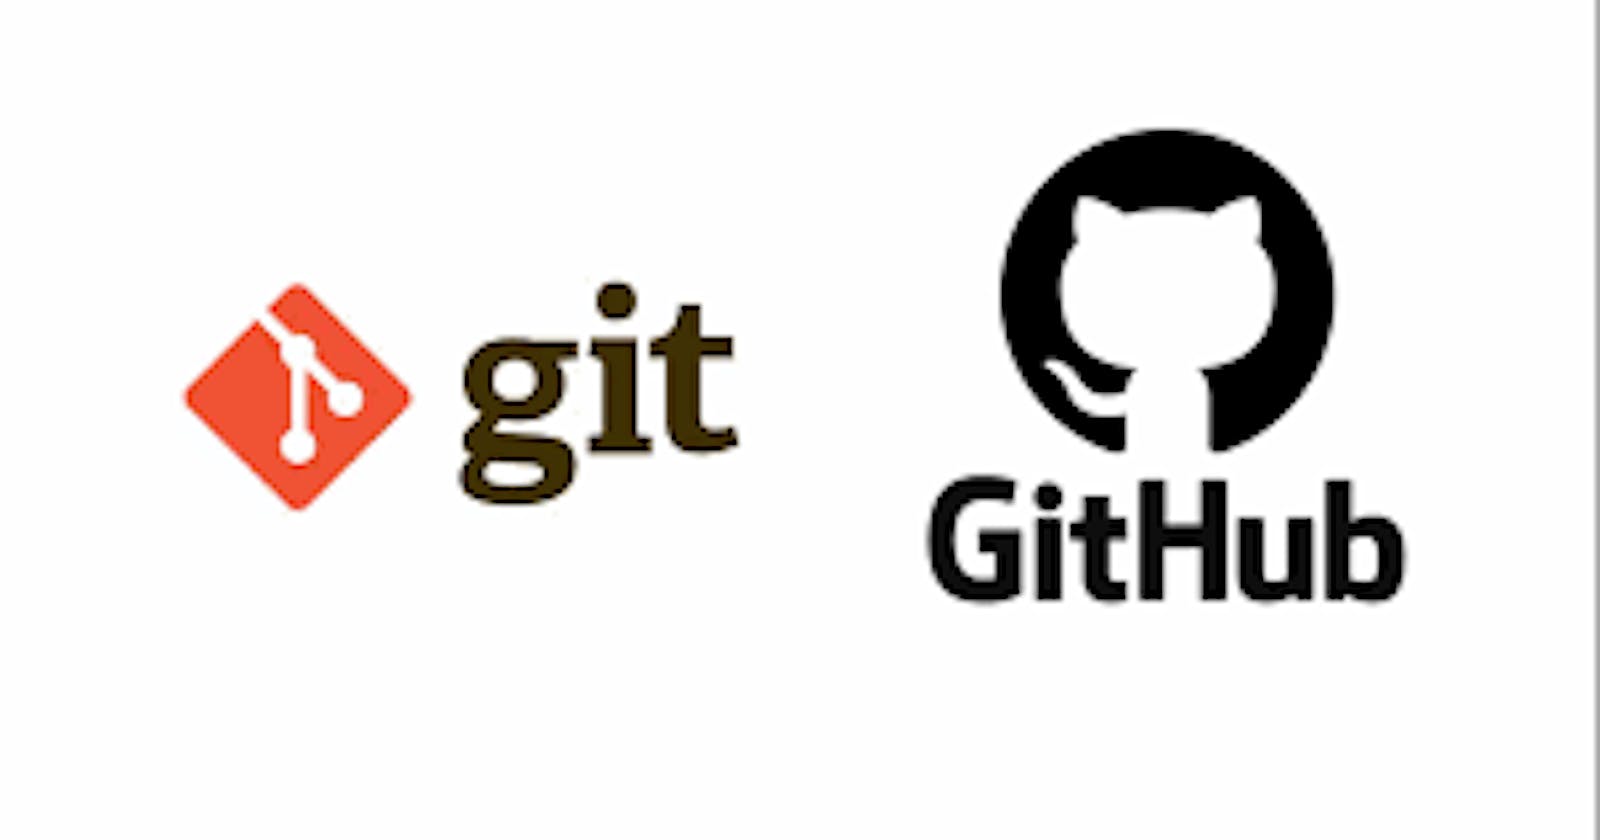 The differences between GIT and GITHUB you should know.